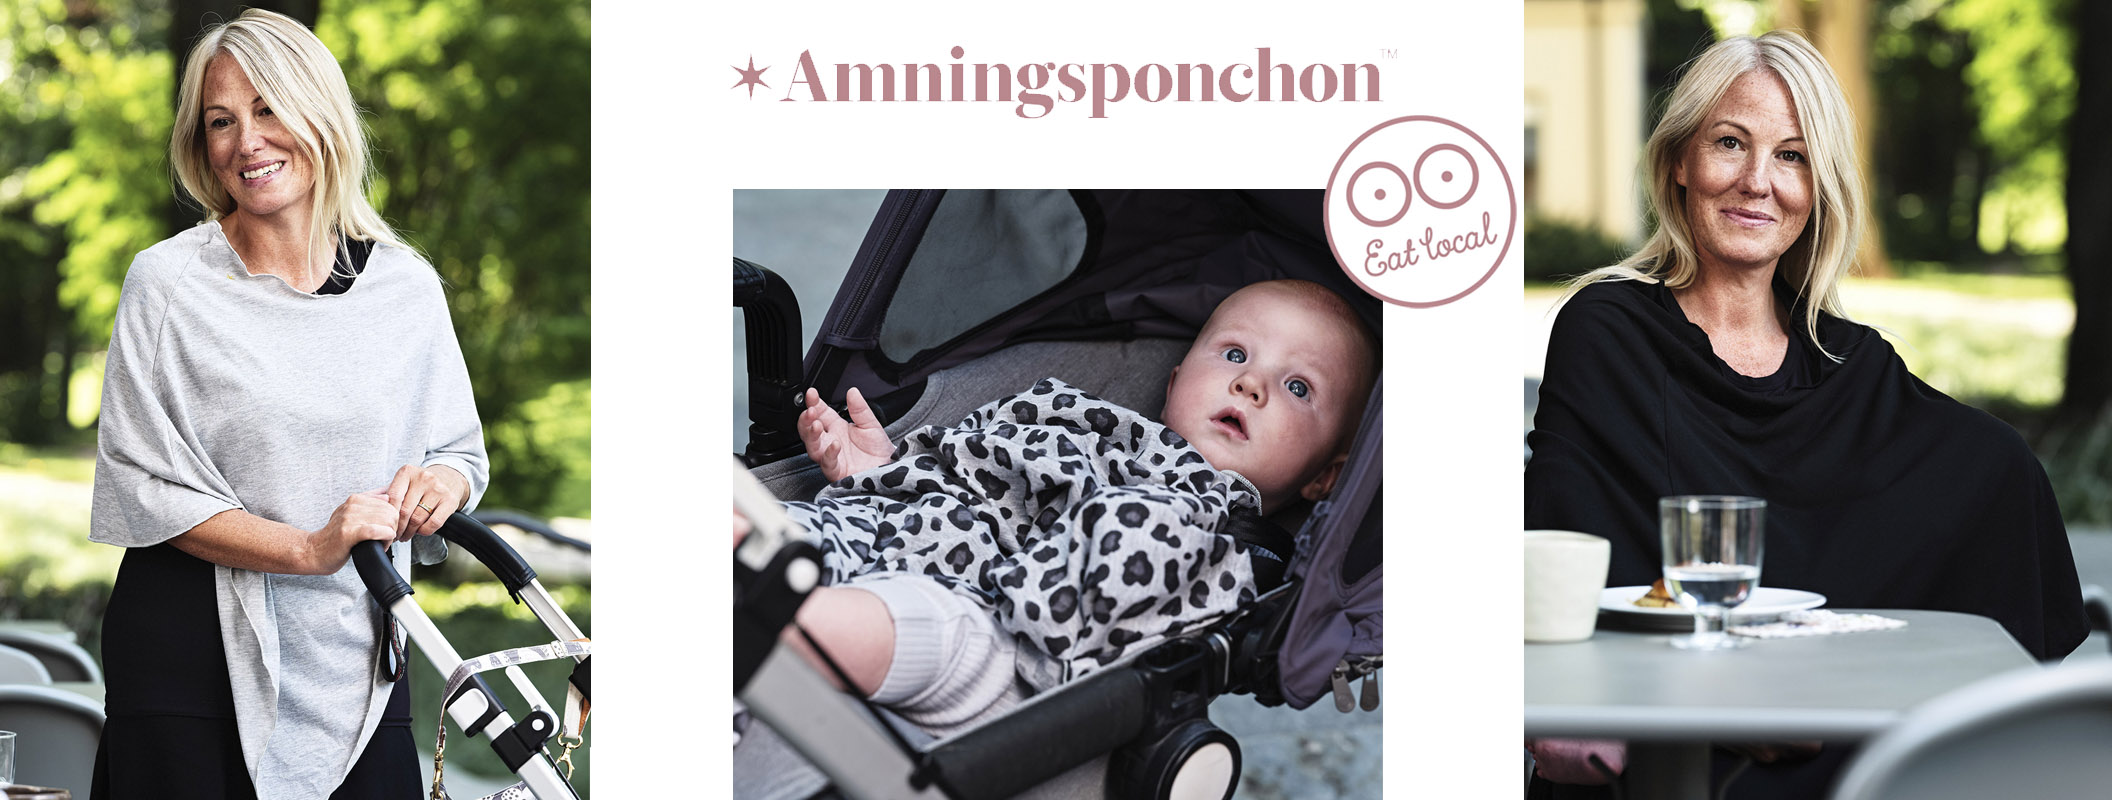 Amningsponchon Brand Page Banner